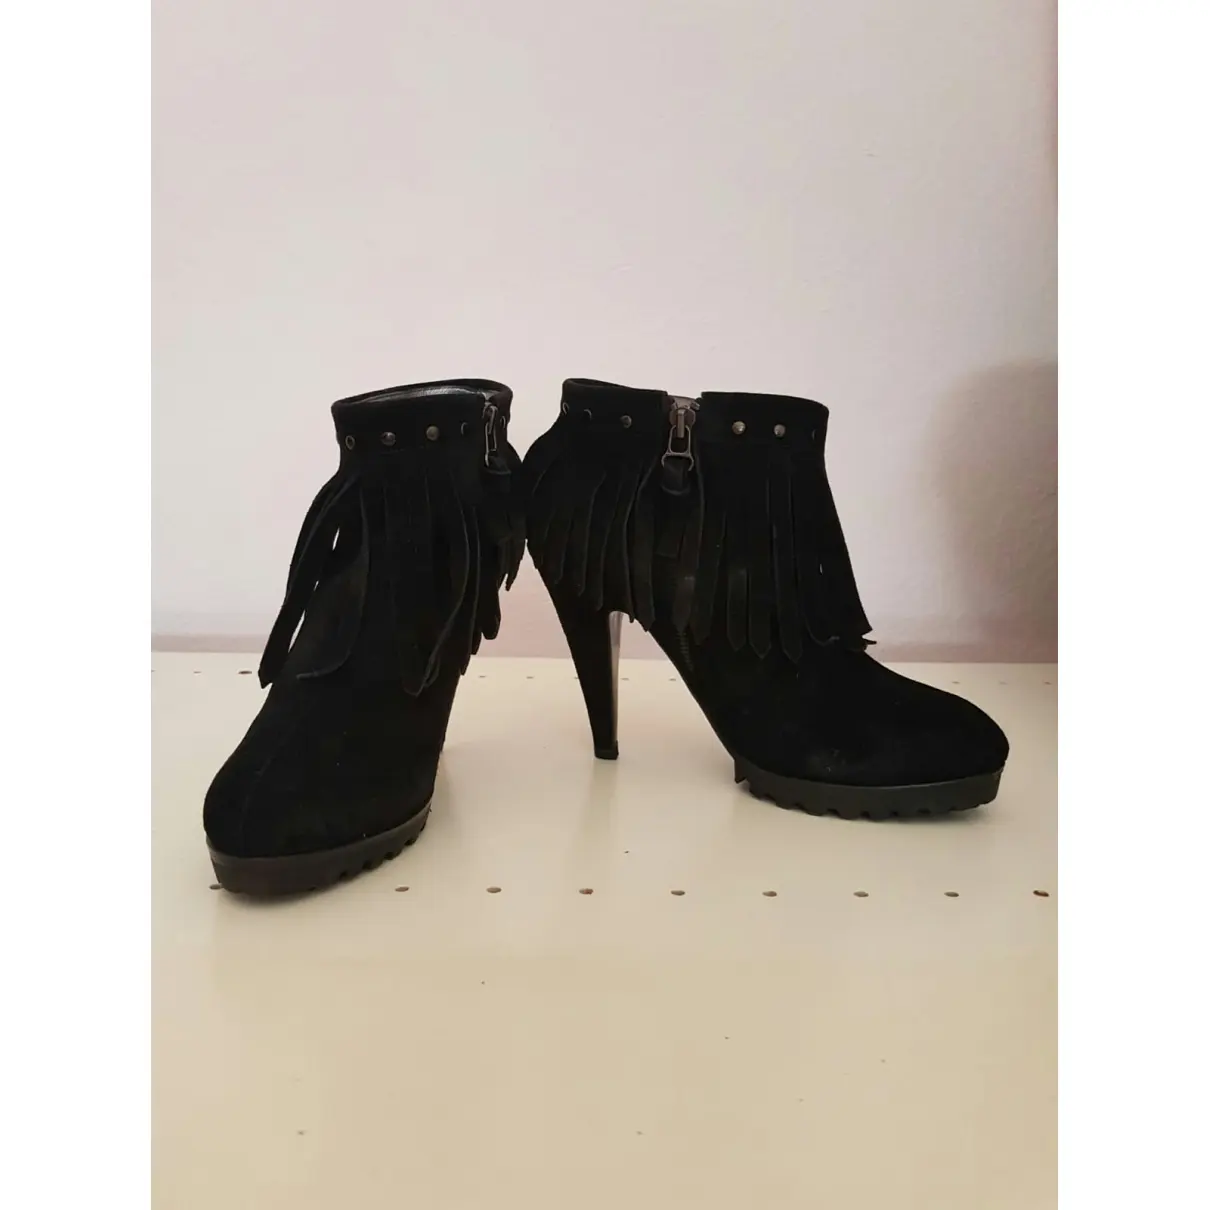 Mauro Grifoni Ankle boots for sale